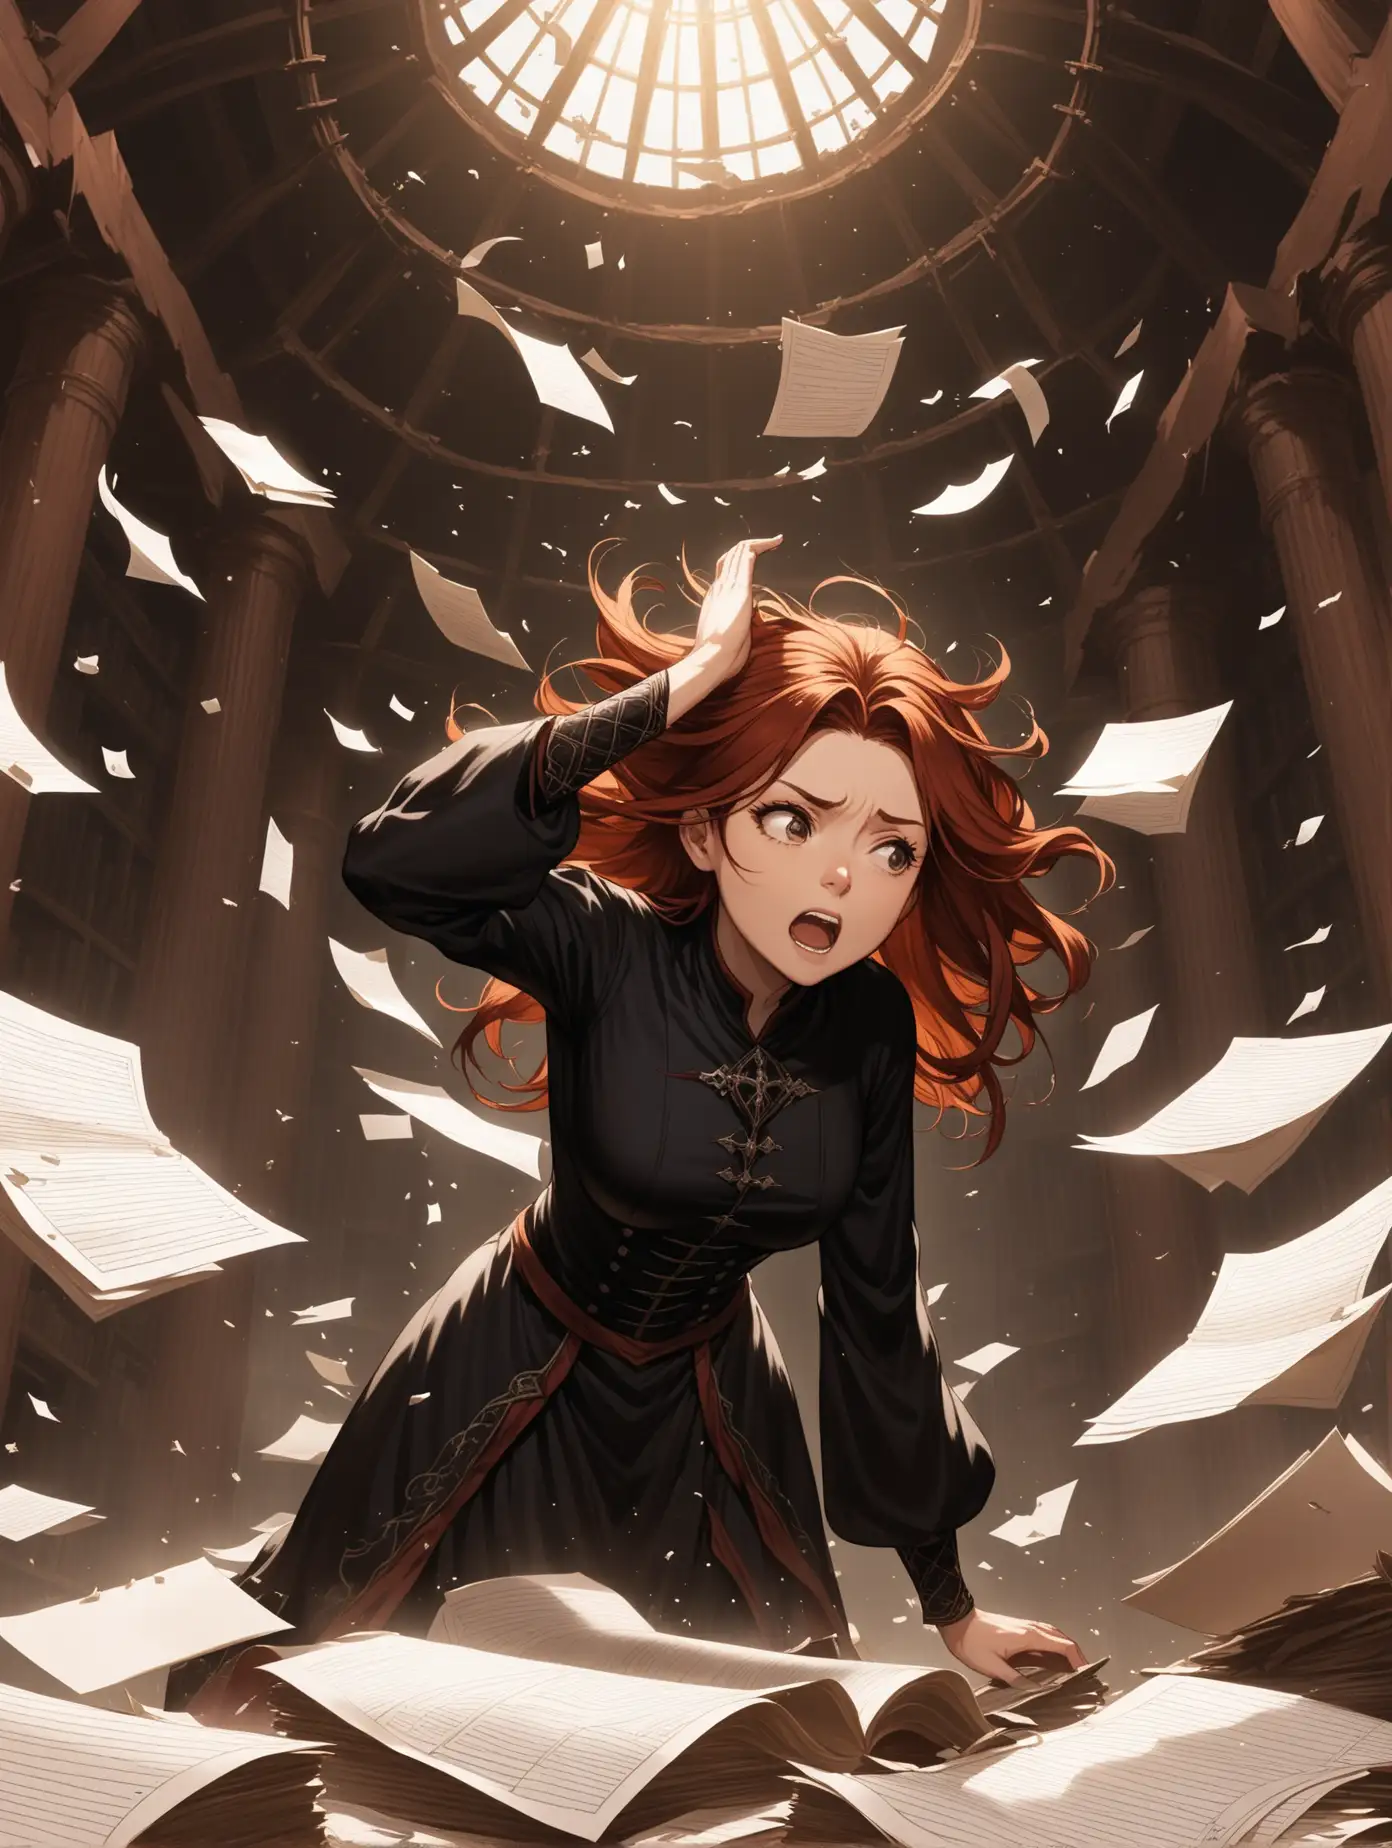 A  stack of papers 4 miles high looms in the ancient study of the forlorn master arcanist. Small black demons jump around causing a mess. She tosses her head back I'm exasperation, sending her auburn hair into disarray 